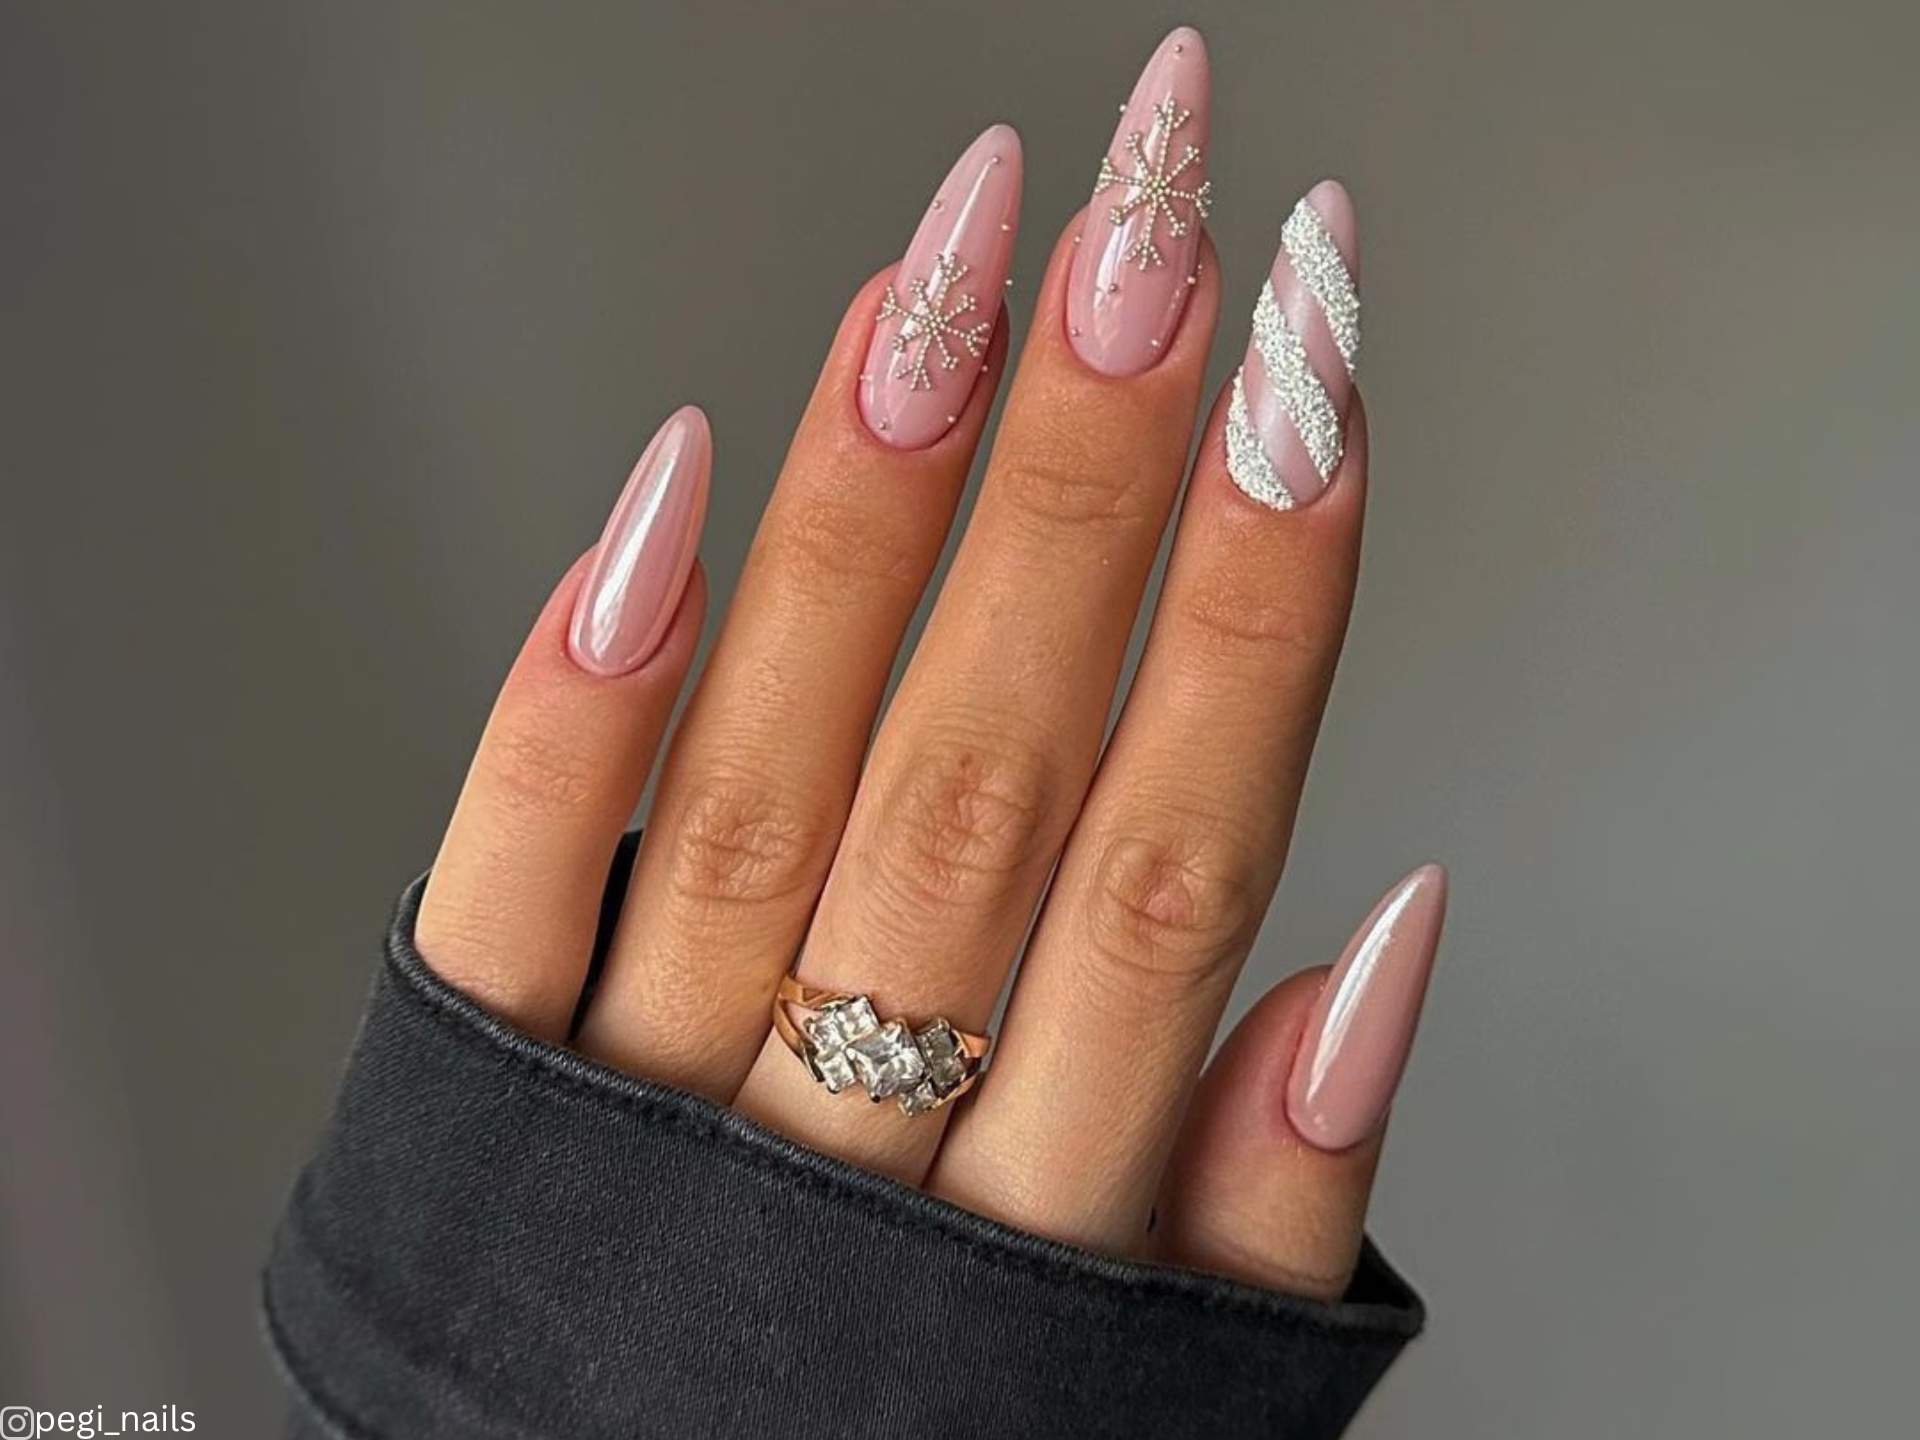 Almond Nails Are The Biggest Hit This Season 